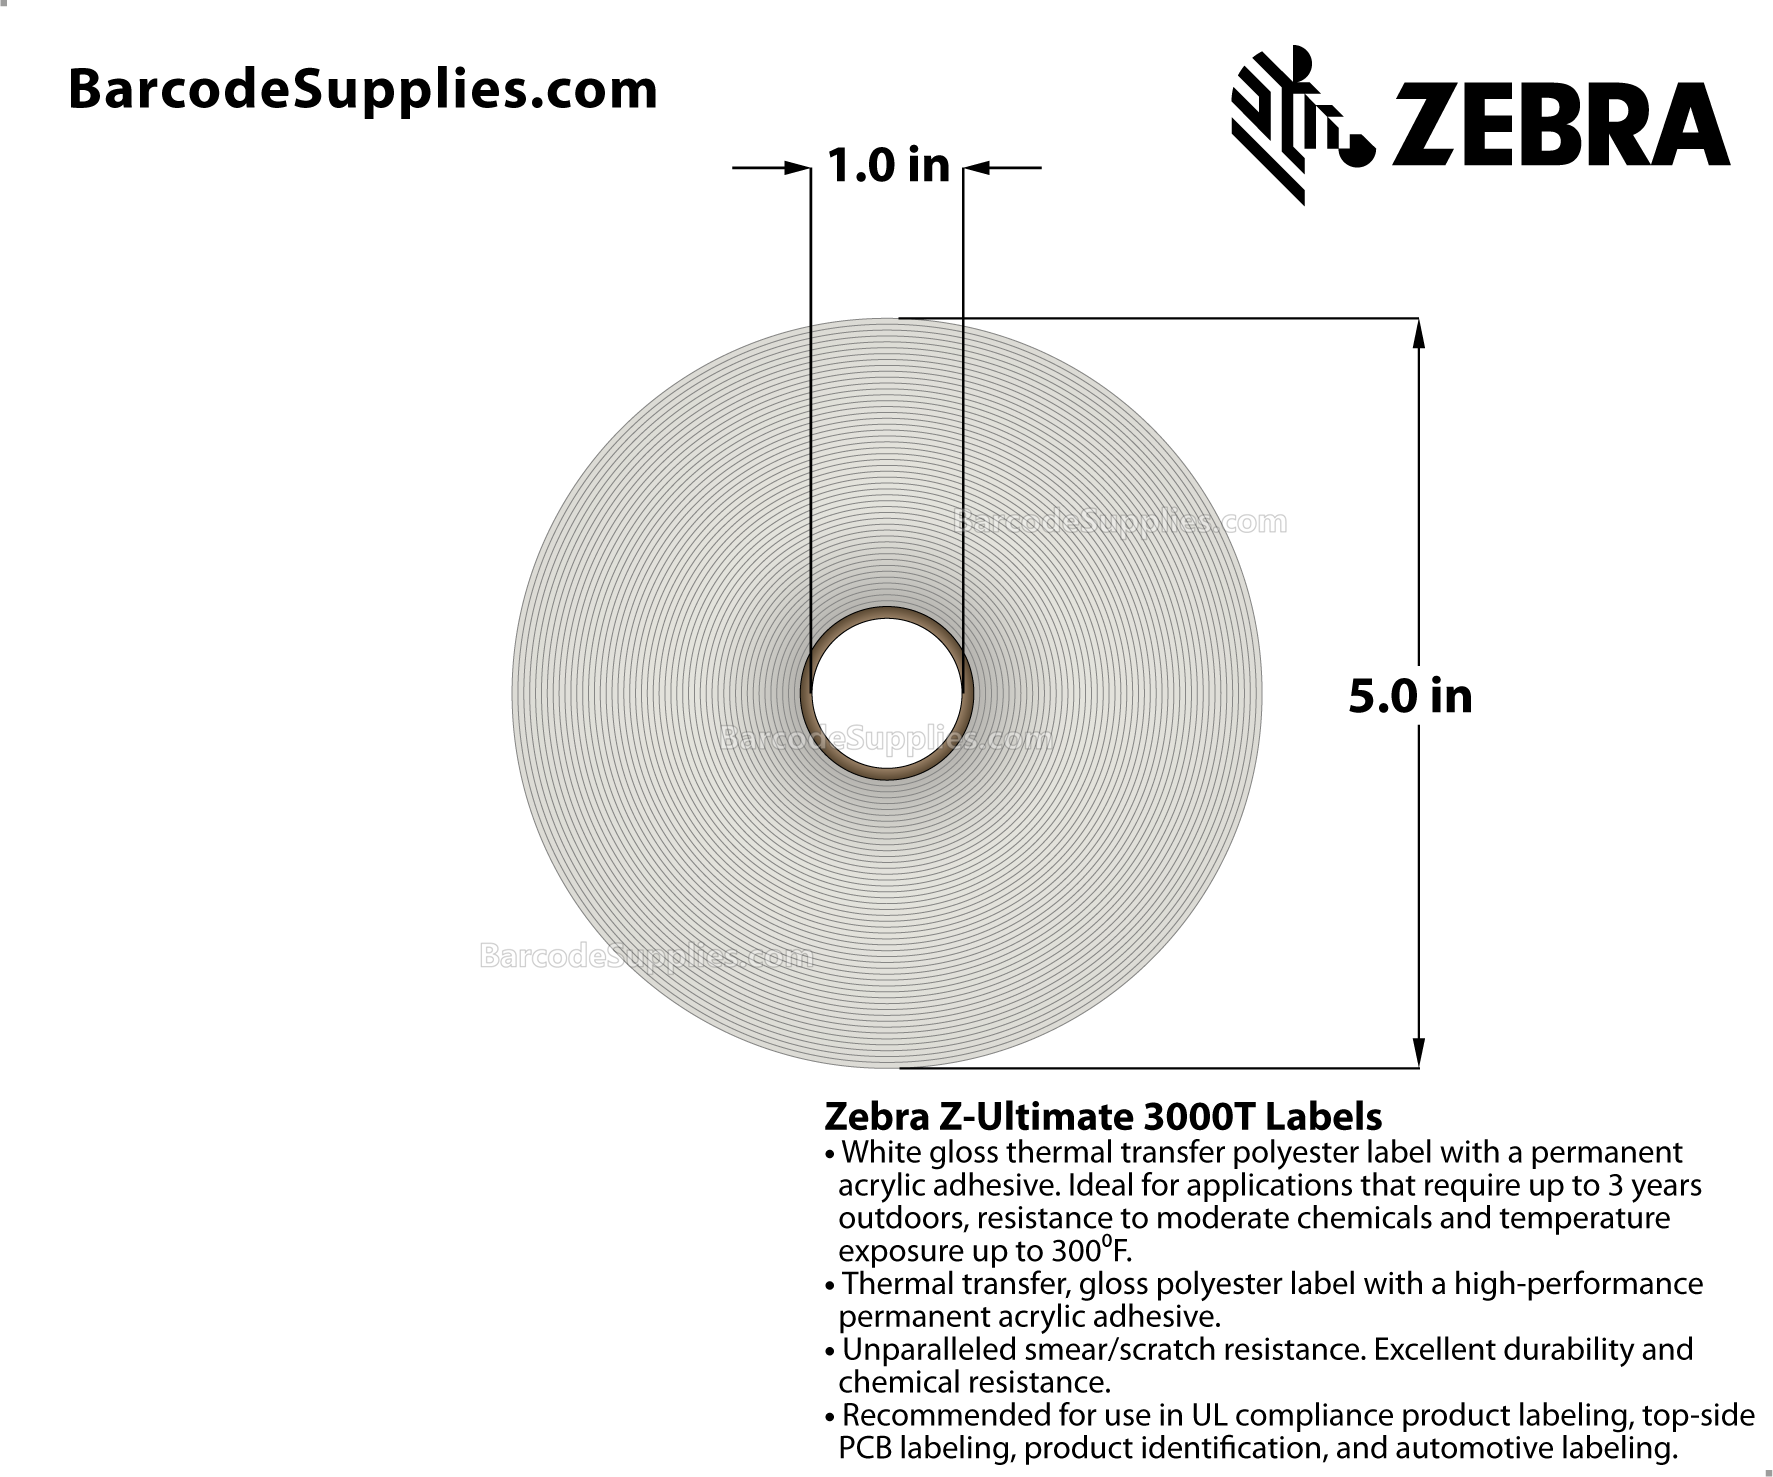 2 x 1.25 Thermal Transfer White Z-Ultimate 3000T Labels With Permanent Adhesive - Perforated - 2070 Labels Per Roll - Carton Of 8 Rolls - 16560 Labels Total - MPN: 18940